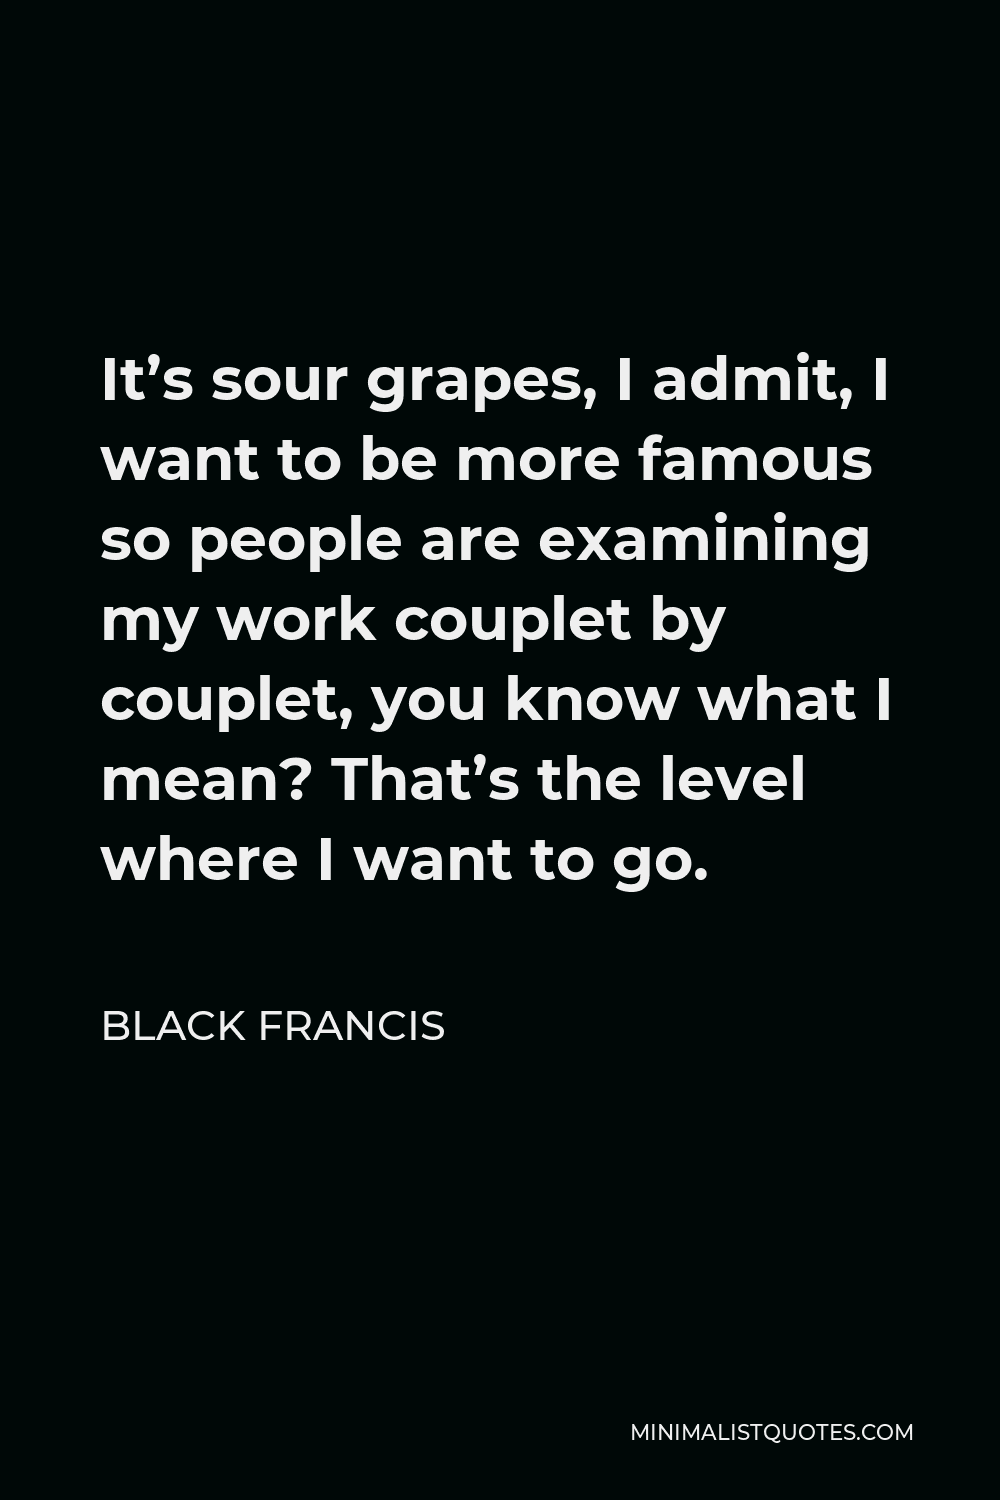 Black Francis Quote - It’s sour grapes, I admit, I want to be more famous so people are examining my work couplet by couplet, you know what I mean? That’s the level where I want to go.